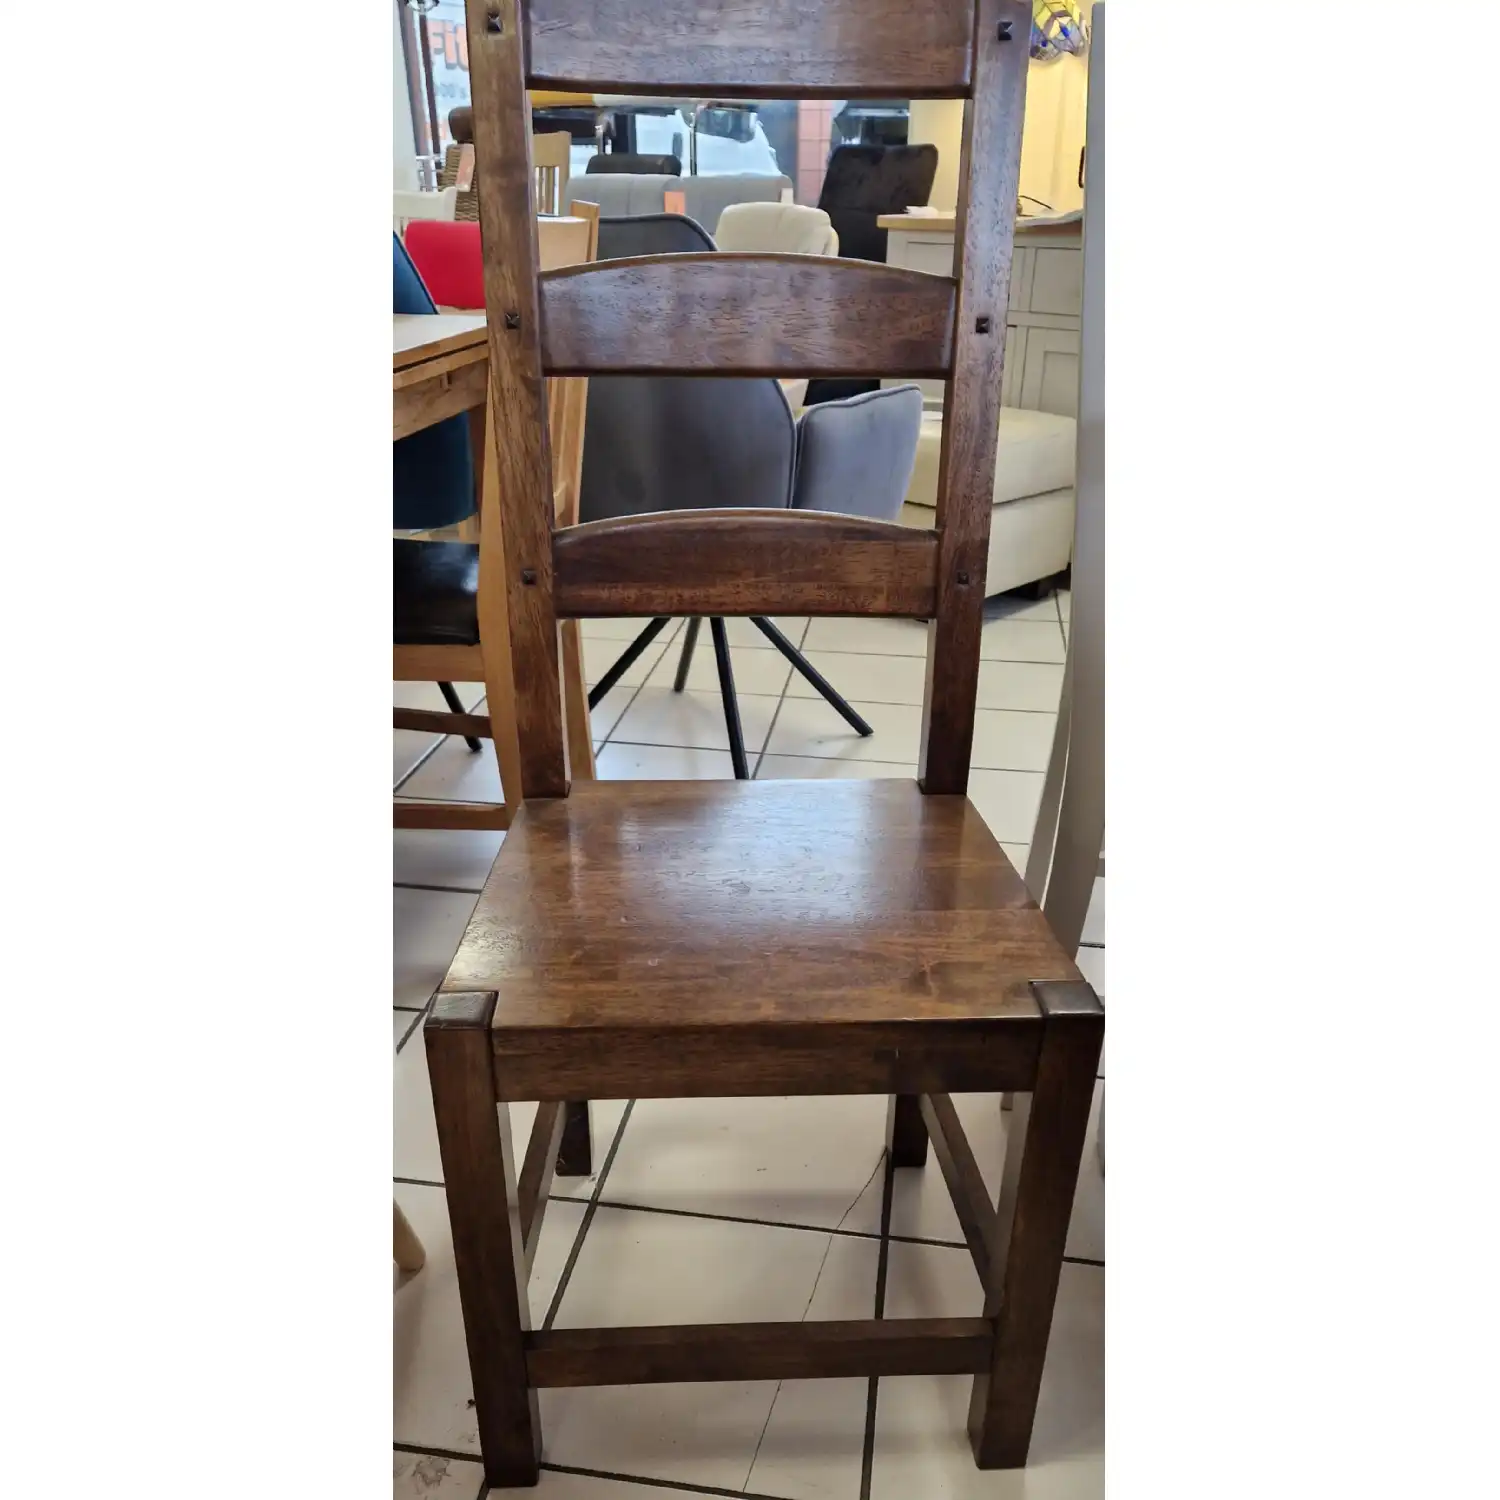 Solid Wood Ladderback Chairs in Dark Stain x 4